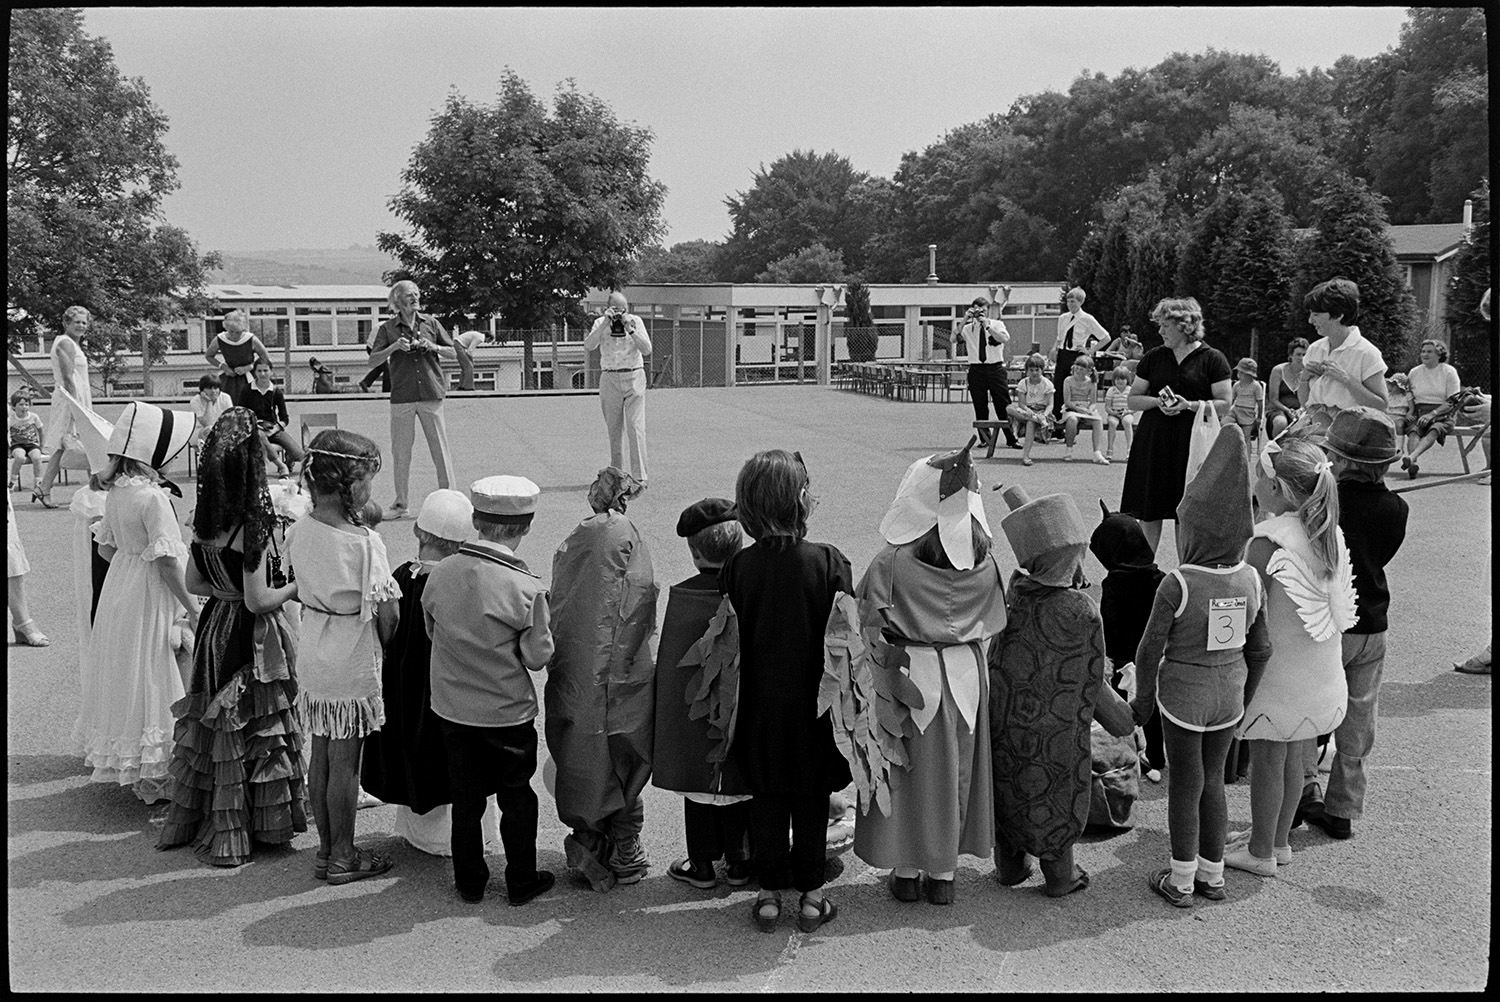 School fete, fancy dress parade mothers and children. 
[People taking photographs of children lined up in their fancy dress costumes at a fancy dress parade at the school fete of Bideford School in the playground.]